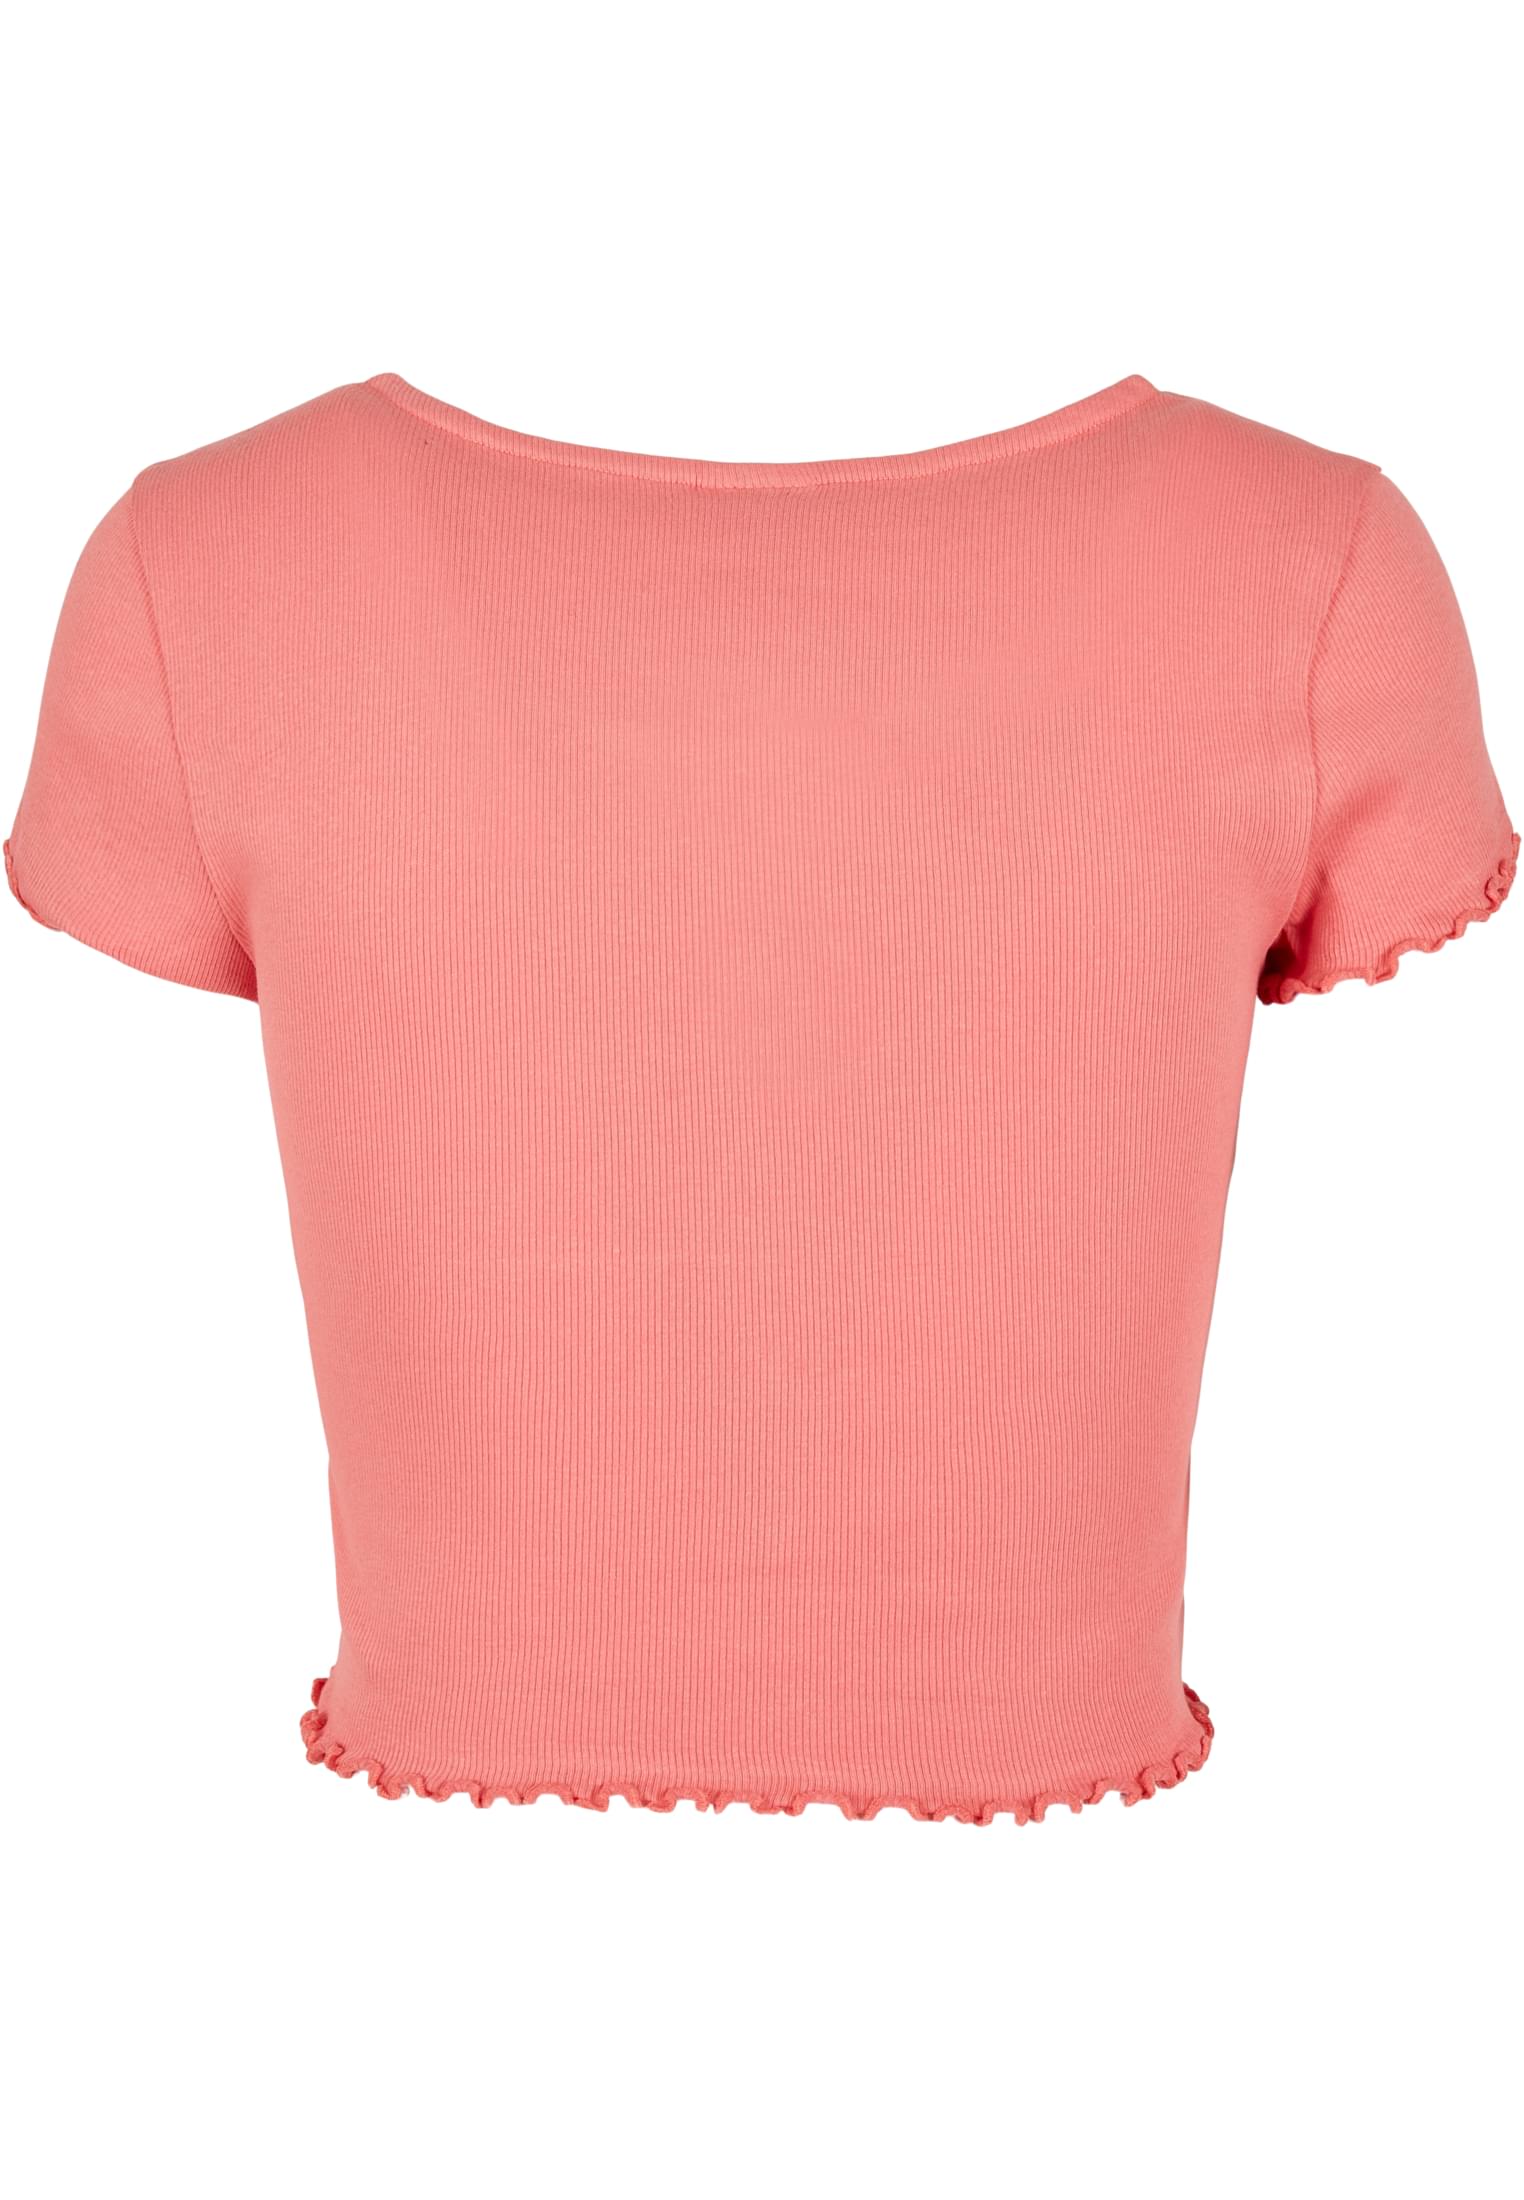 Frauen Ladies Cropped Button Up Rib Tee in Farbe palepink